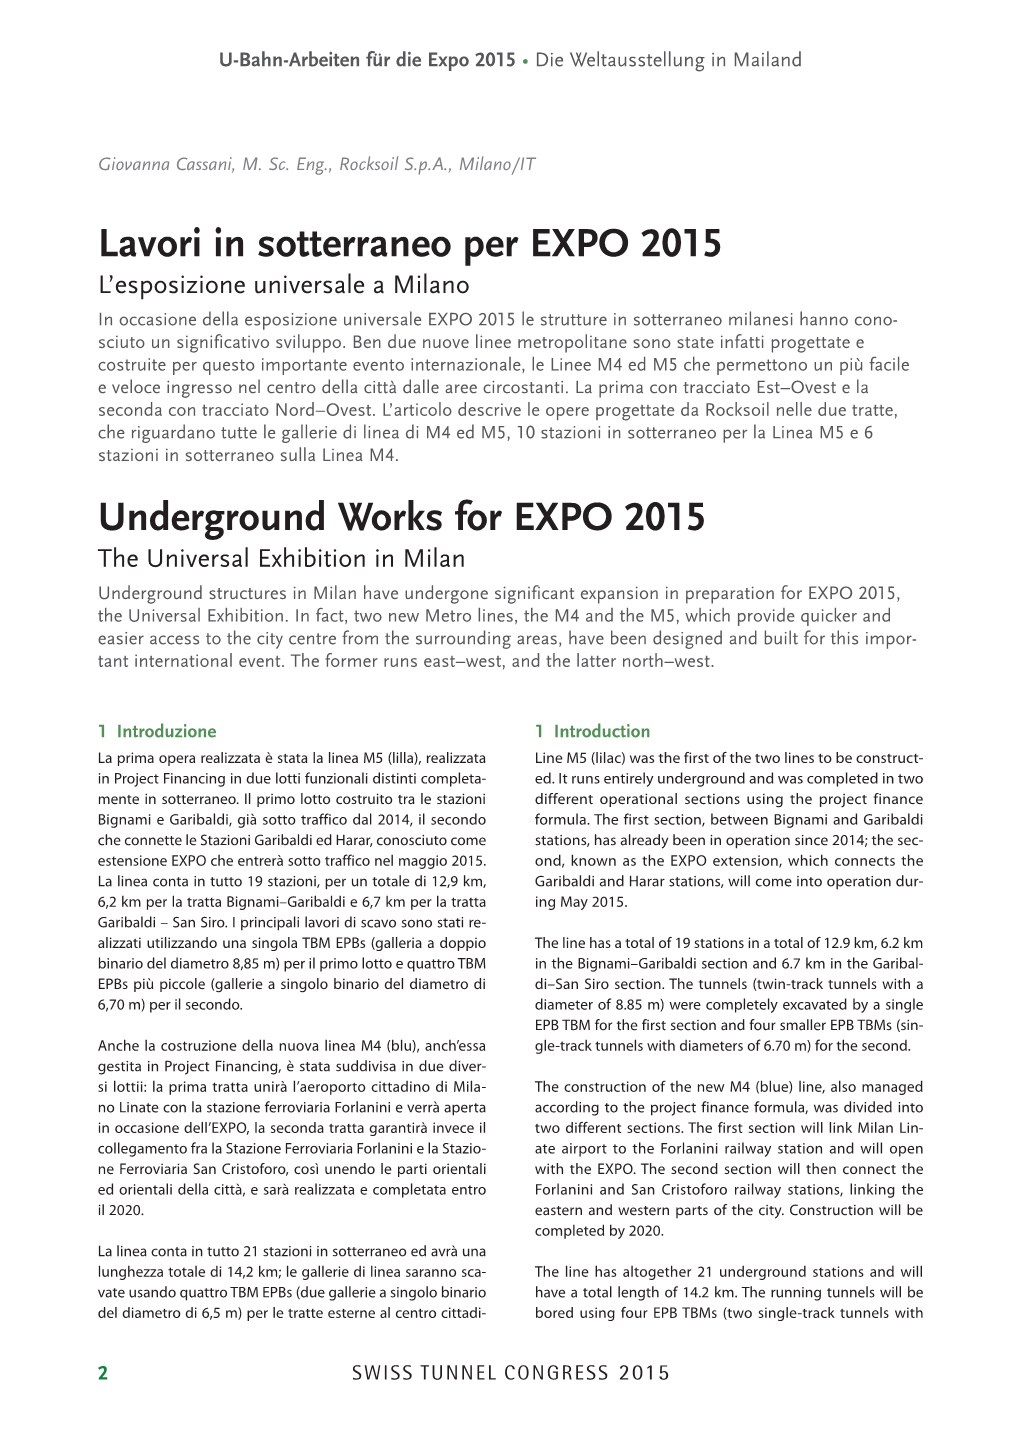 Lavori in Sotterraneo Per EXPO 2015 Underground Works for EXPO 2015